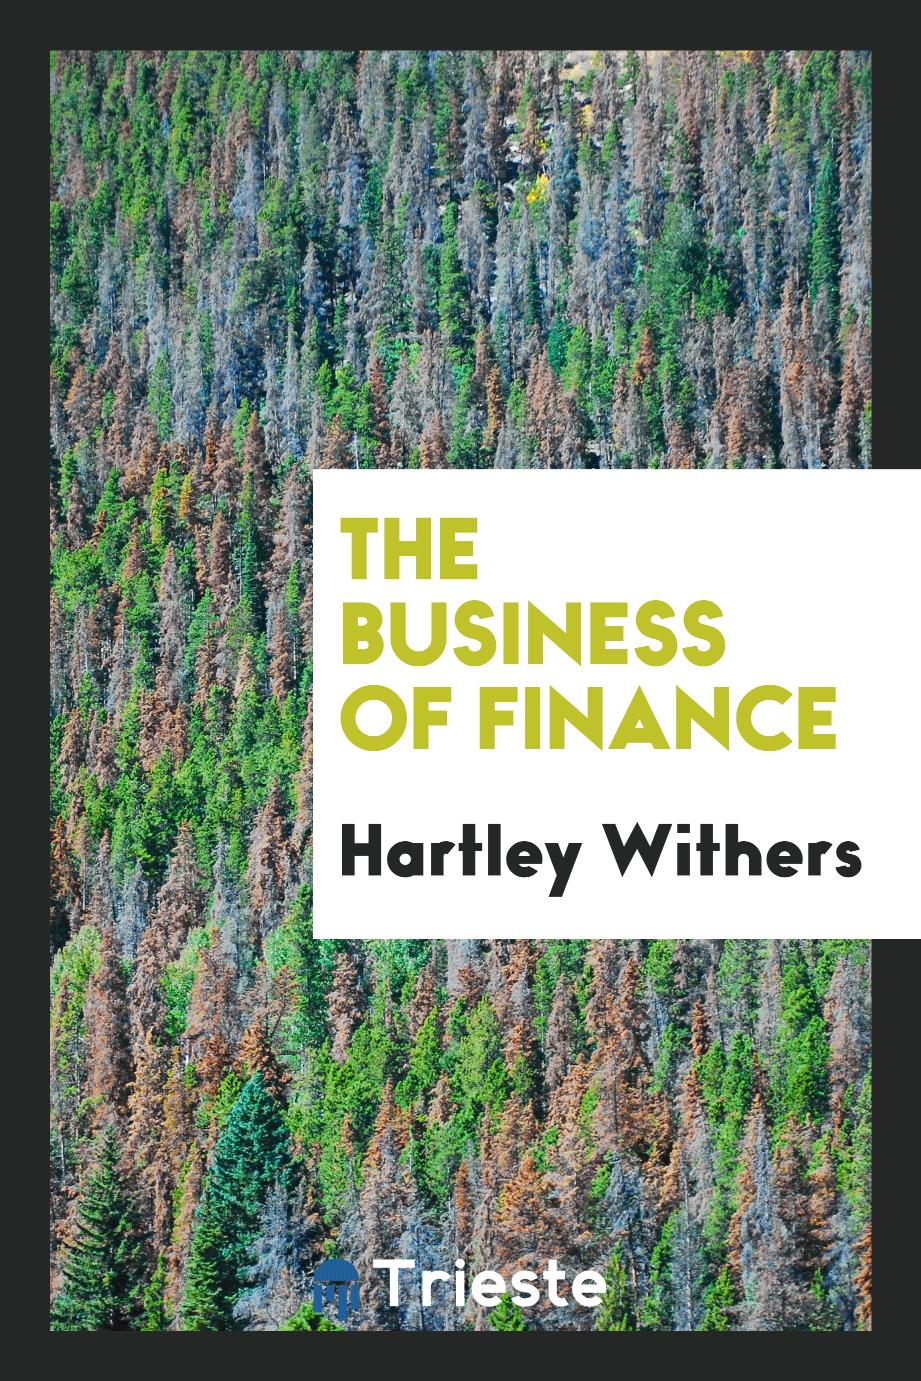 The business of finance